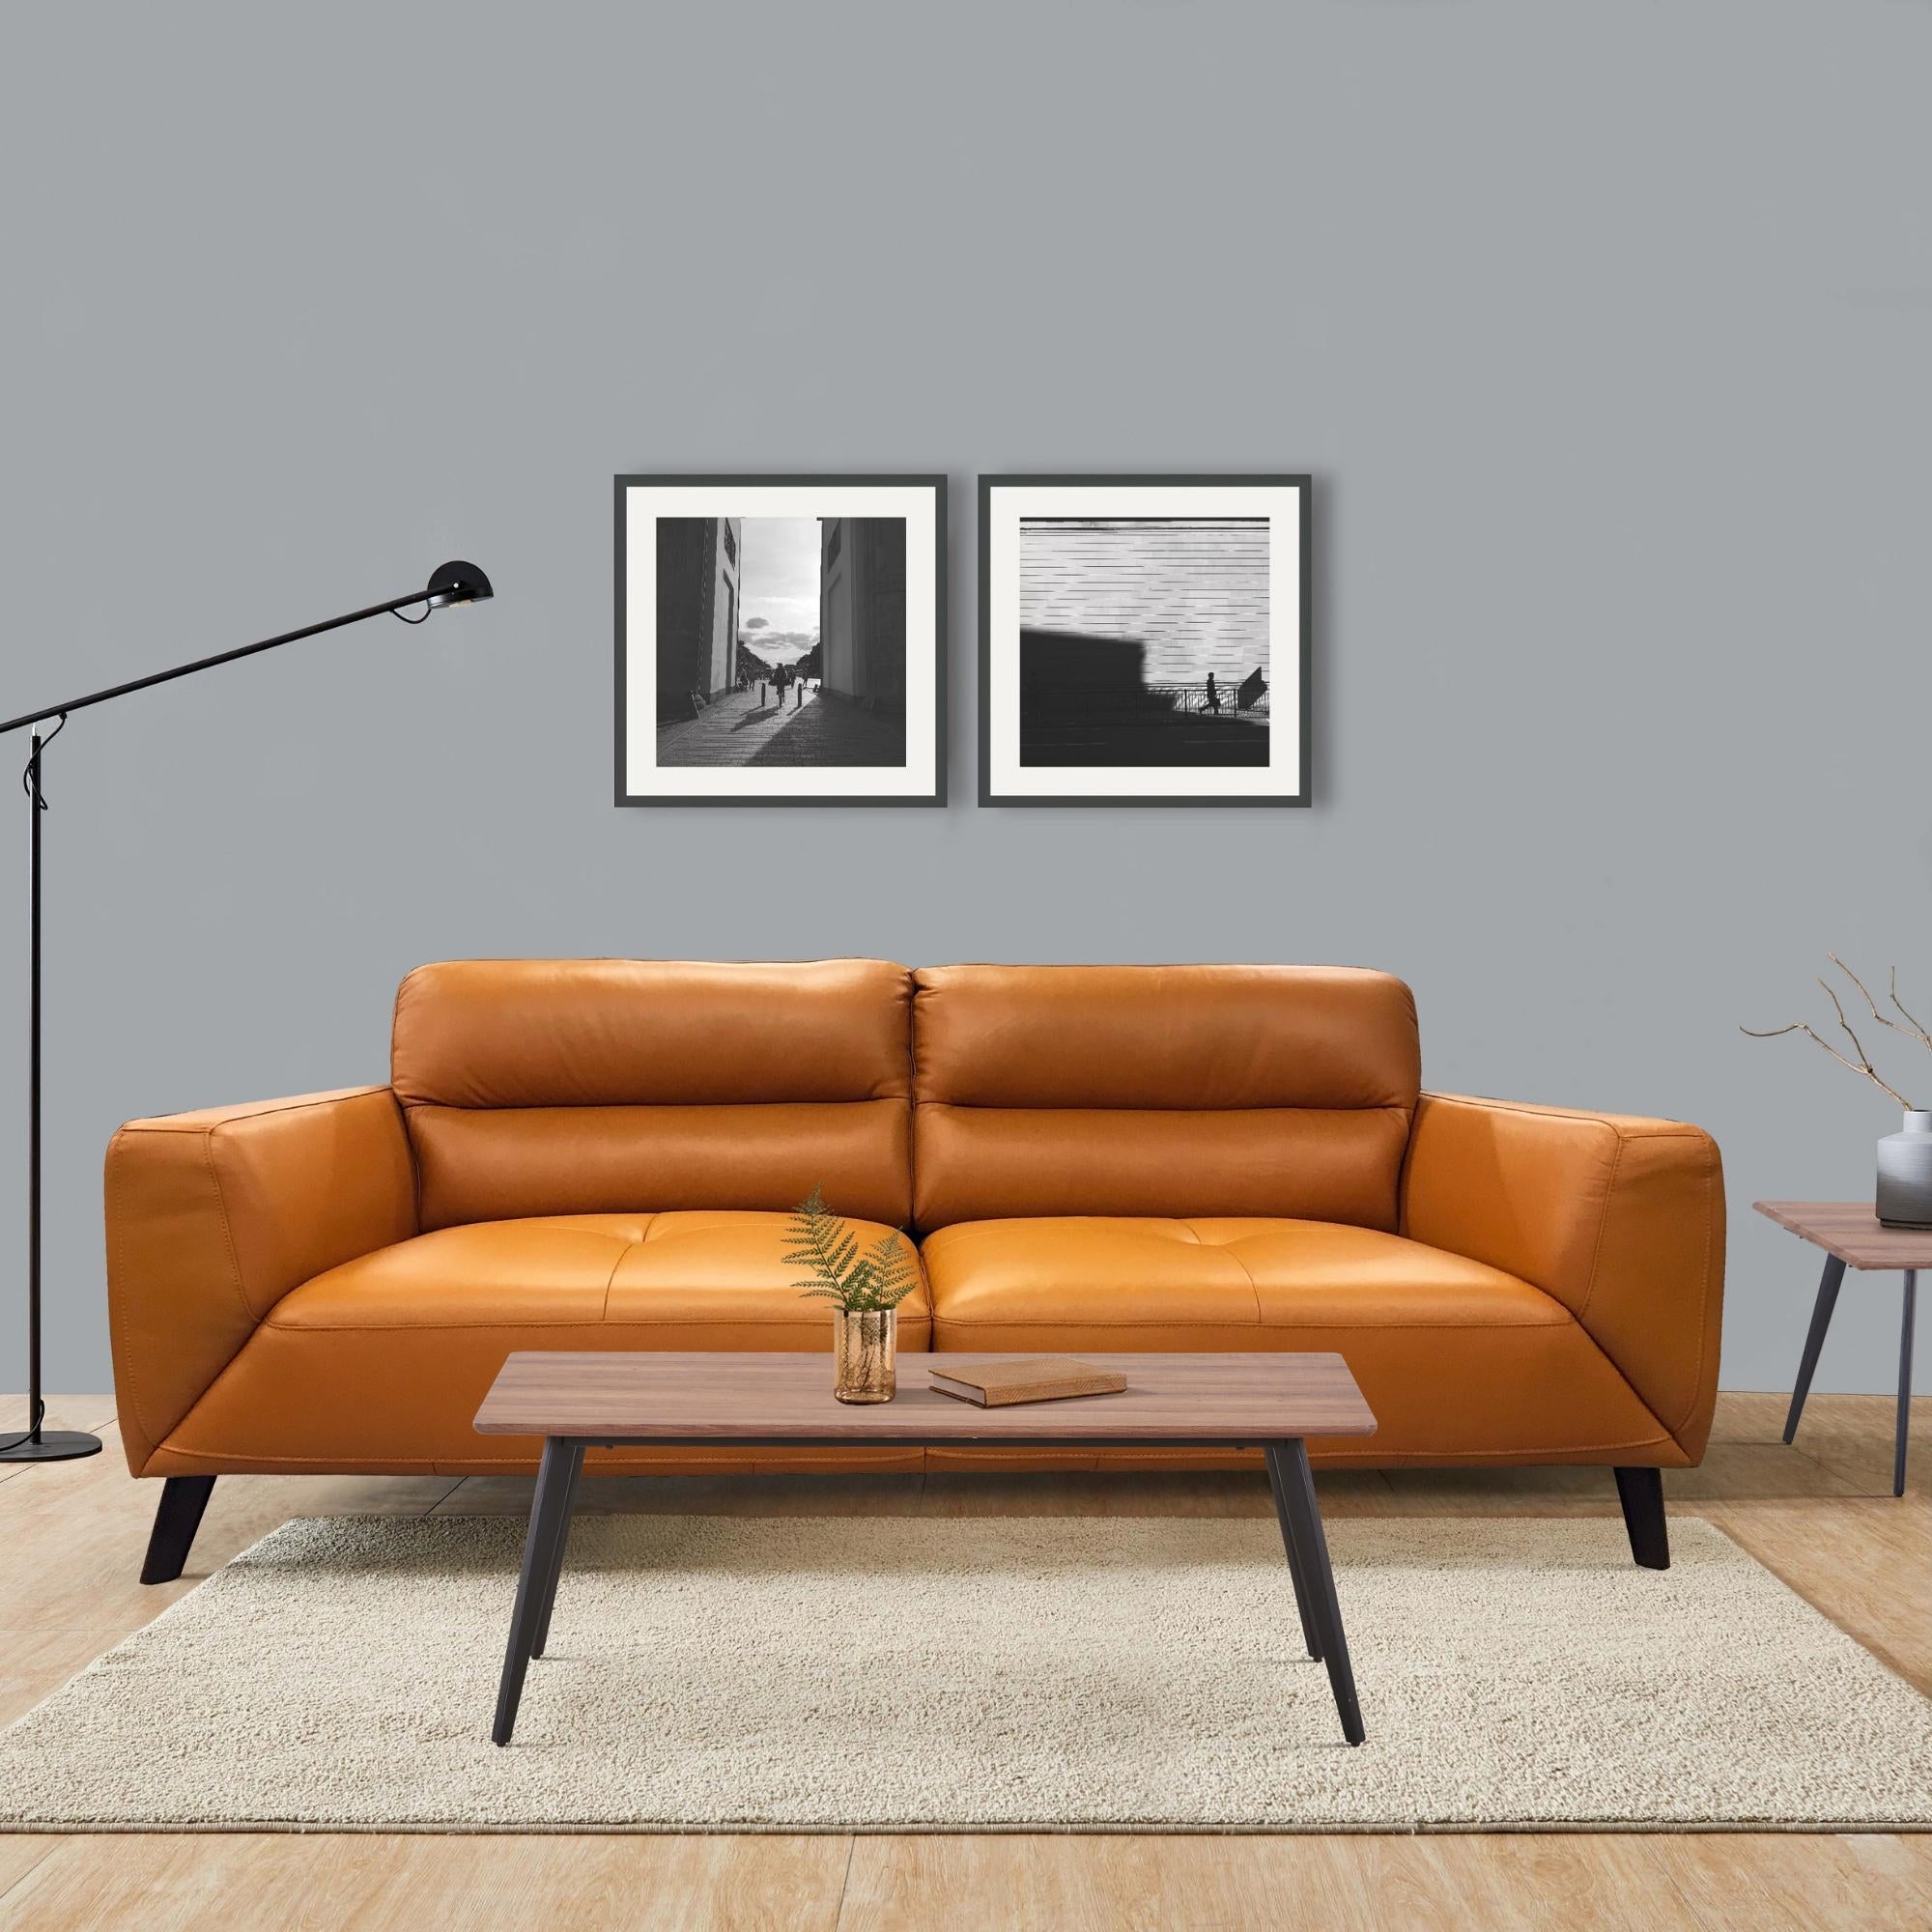 Downy  Genuine Leather Sofa 3 Seater Upholstered Lounge Couch - Tangerine